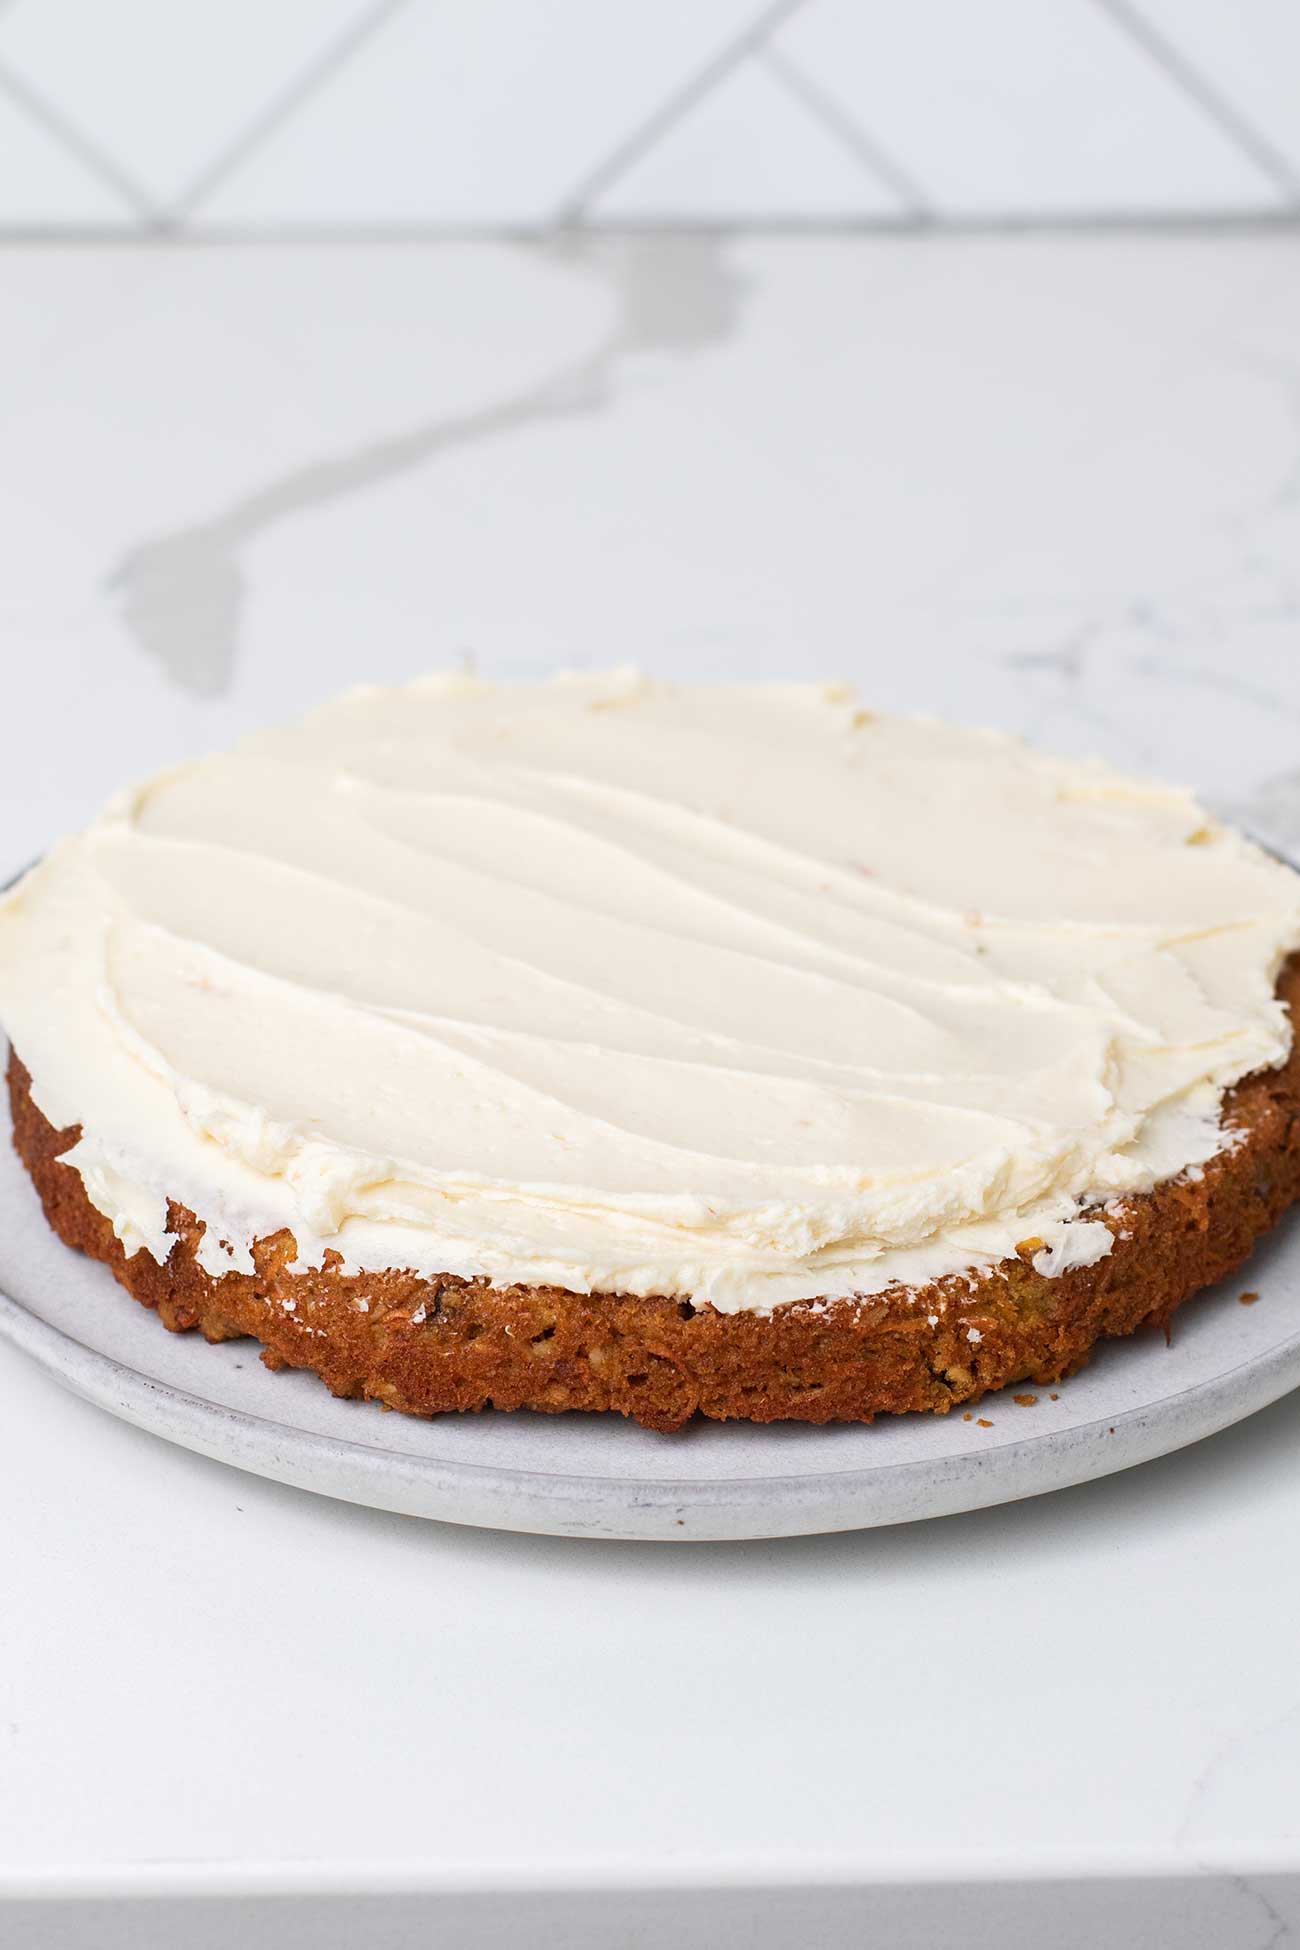 1 layer of the carrot cake topped with a thick layer of cream cheese frosting.